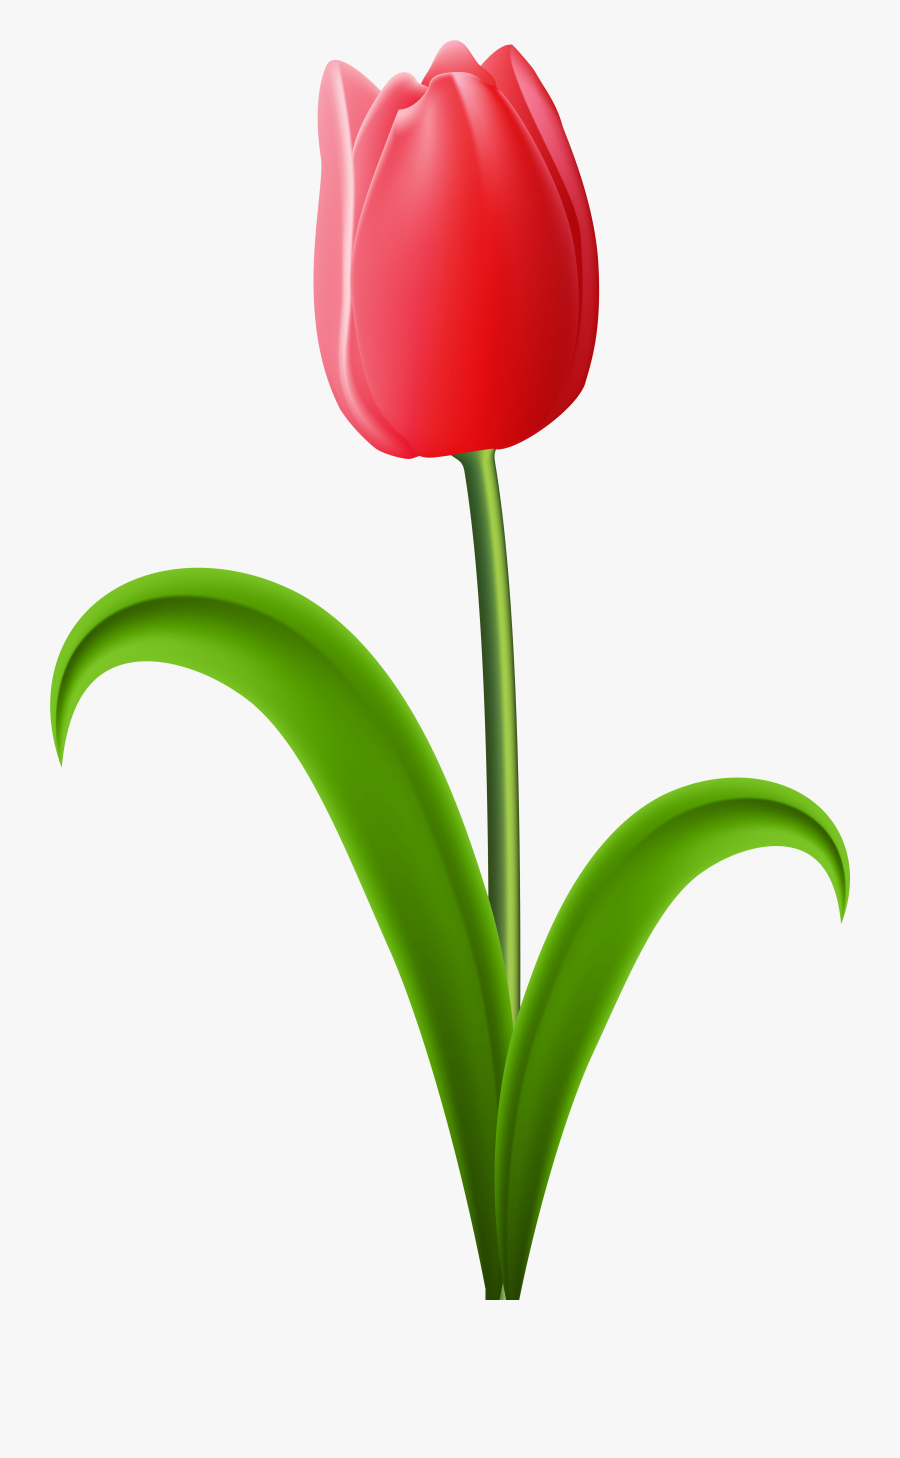 Red Tulip Clipart - Red Tulips Transparent Background, Transparent Clipart